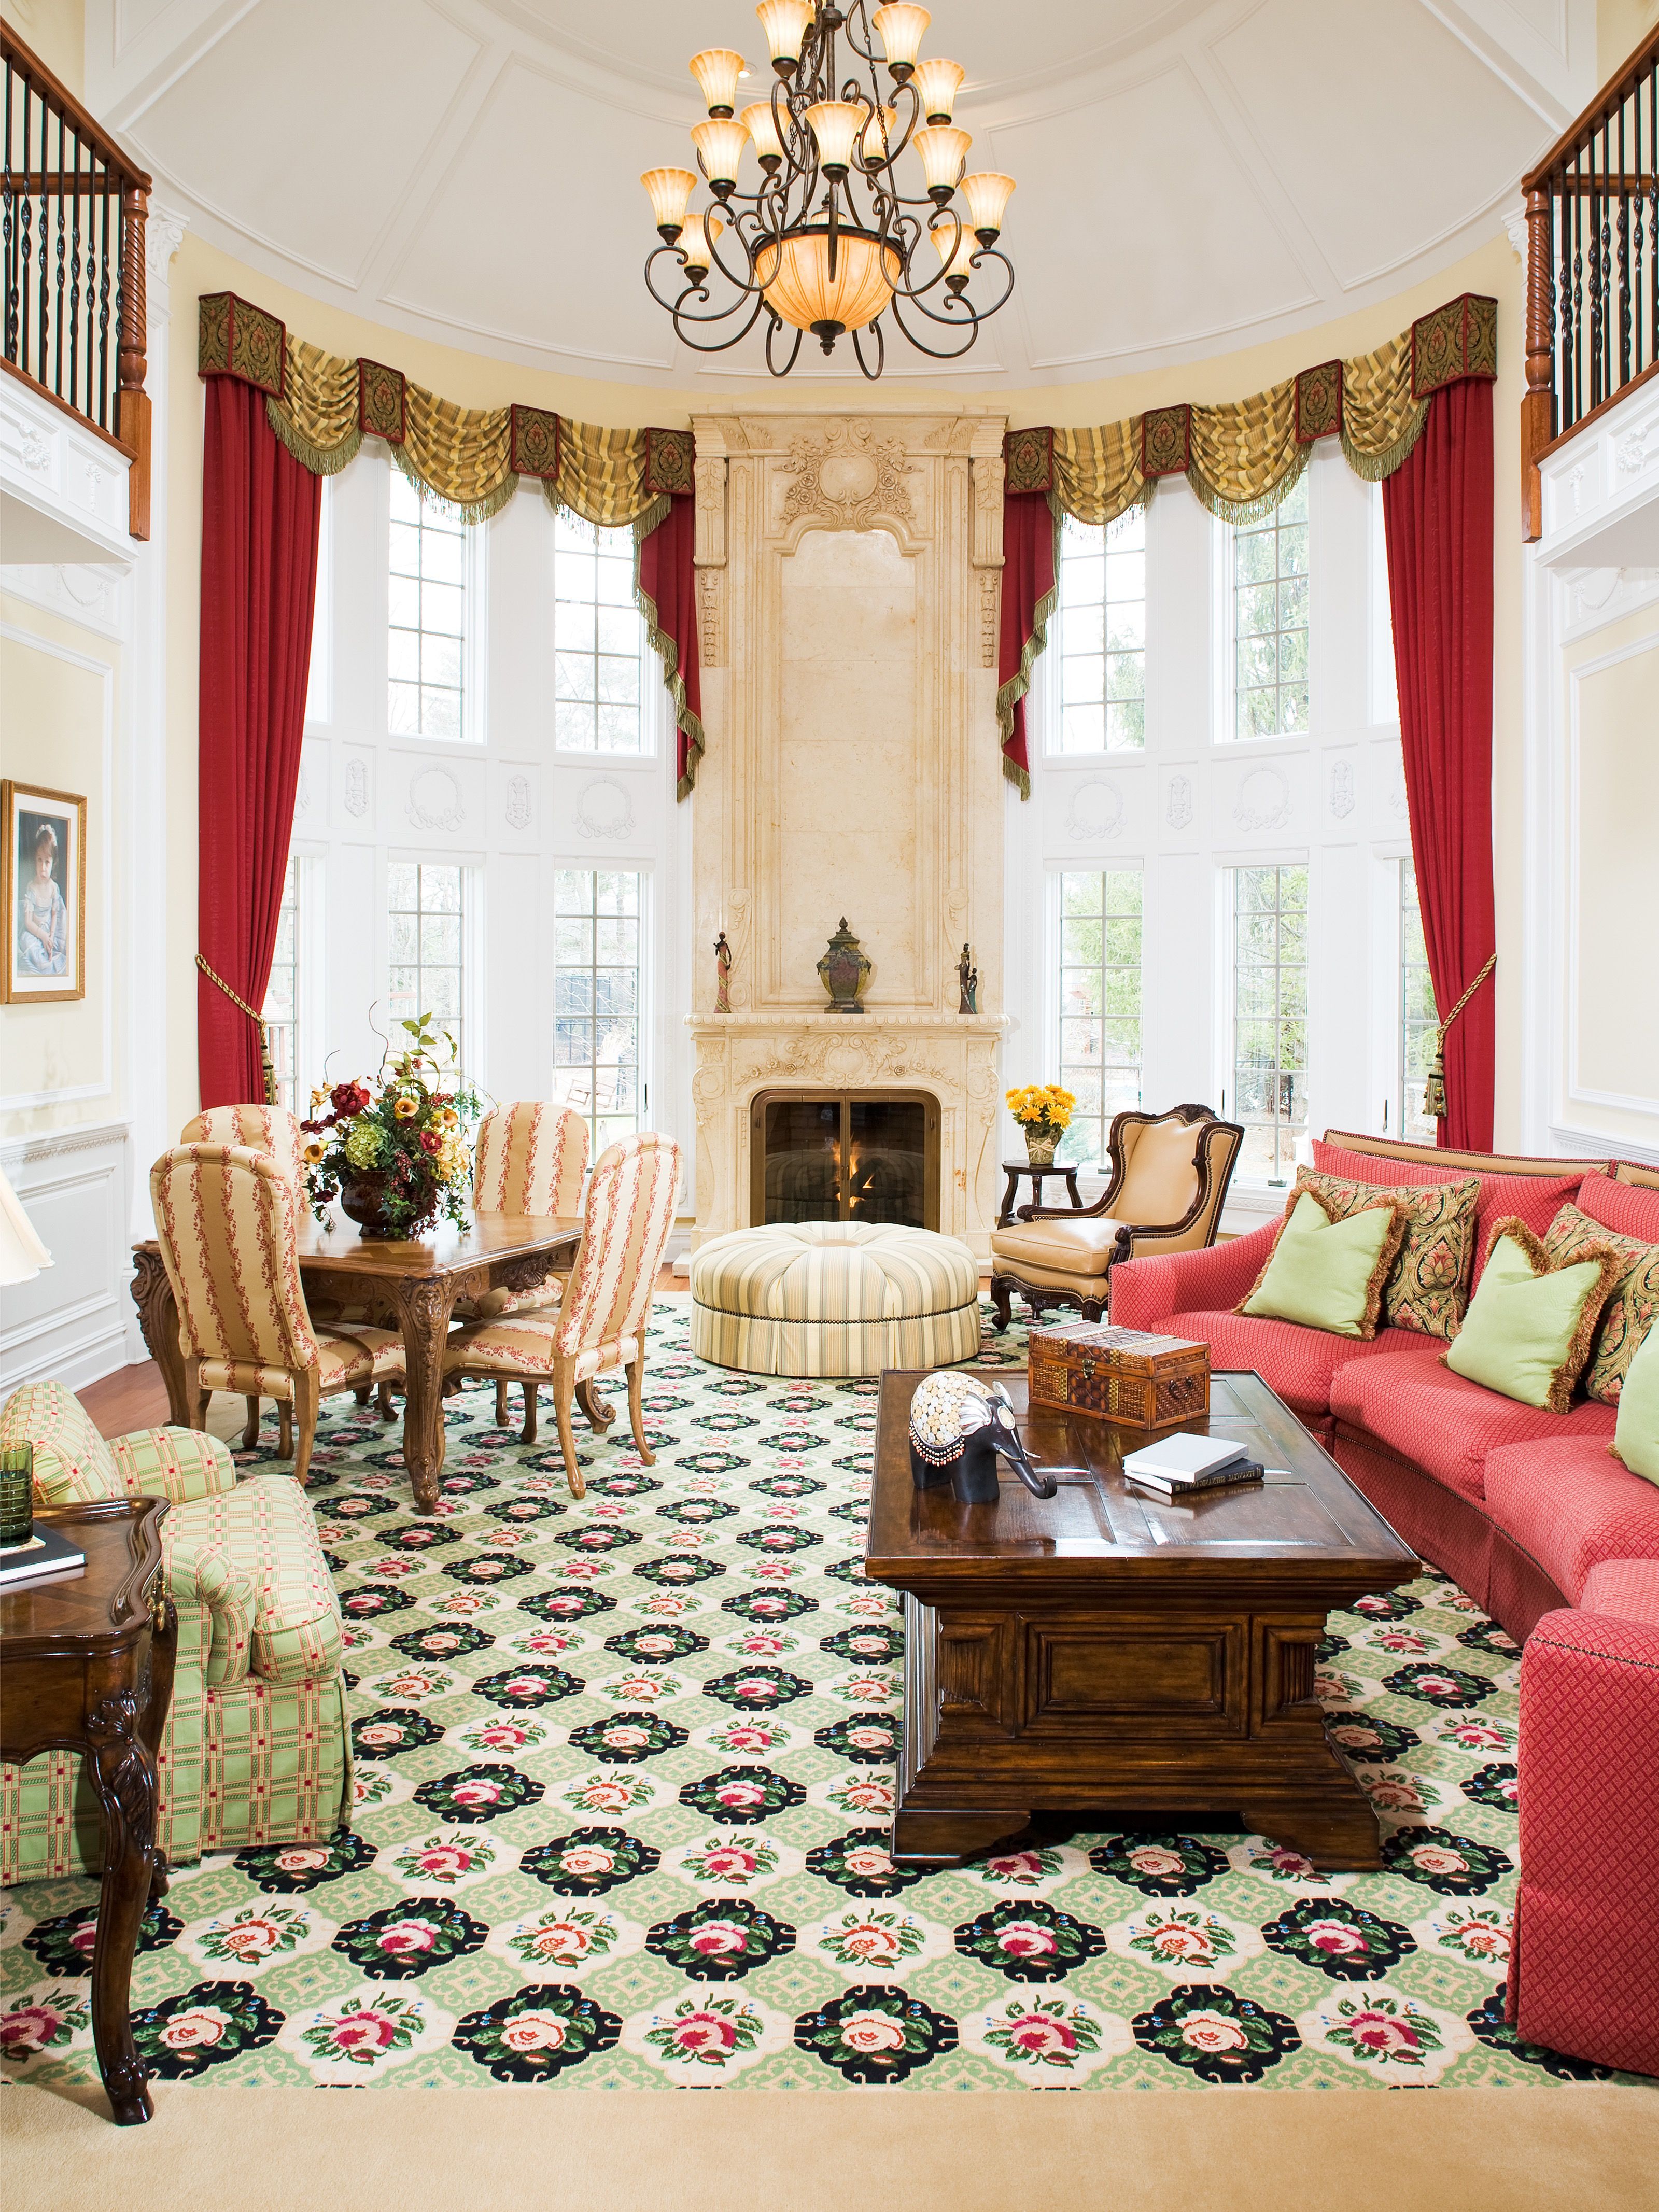 Classic French Living Room Decor With Colorful Formal Drapes (View 2 of 15)